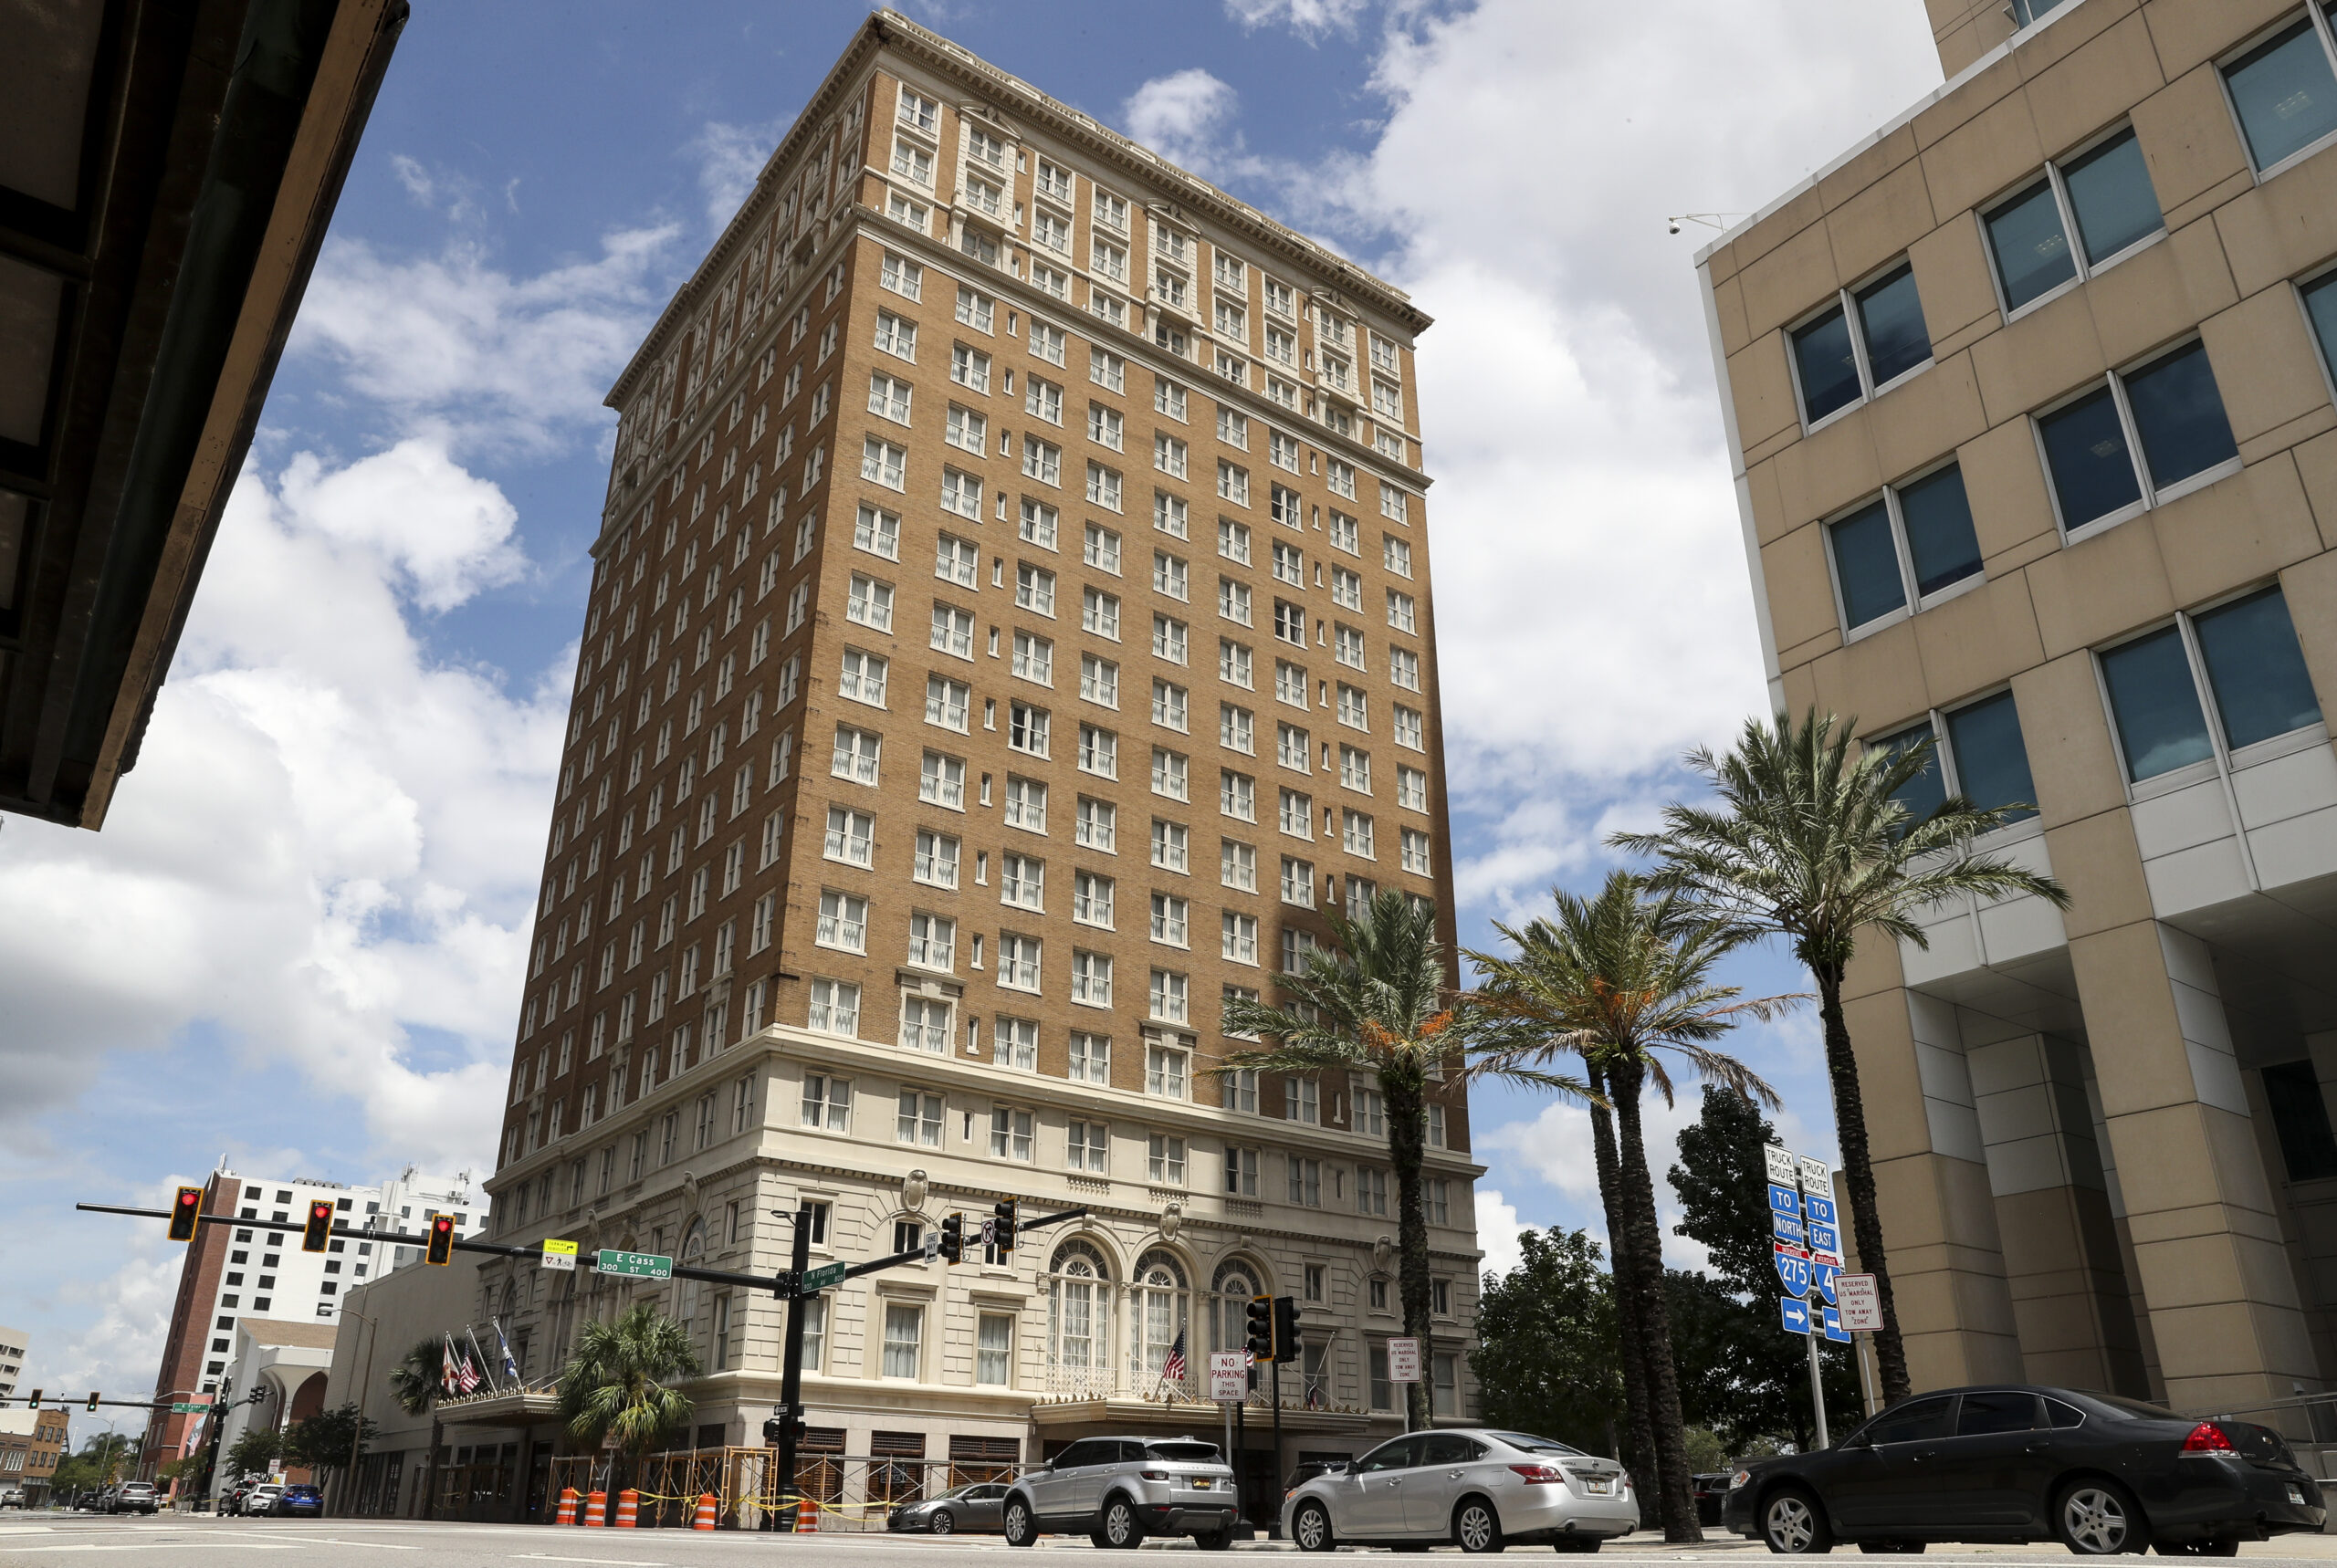 Hotel Floridan's transformation, costing $30 million, is almost done, and its new name reflects a nod to its historical roots